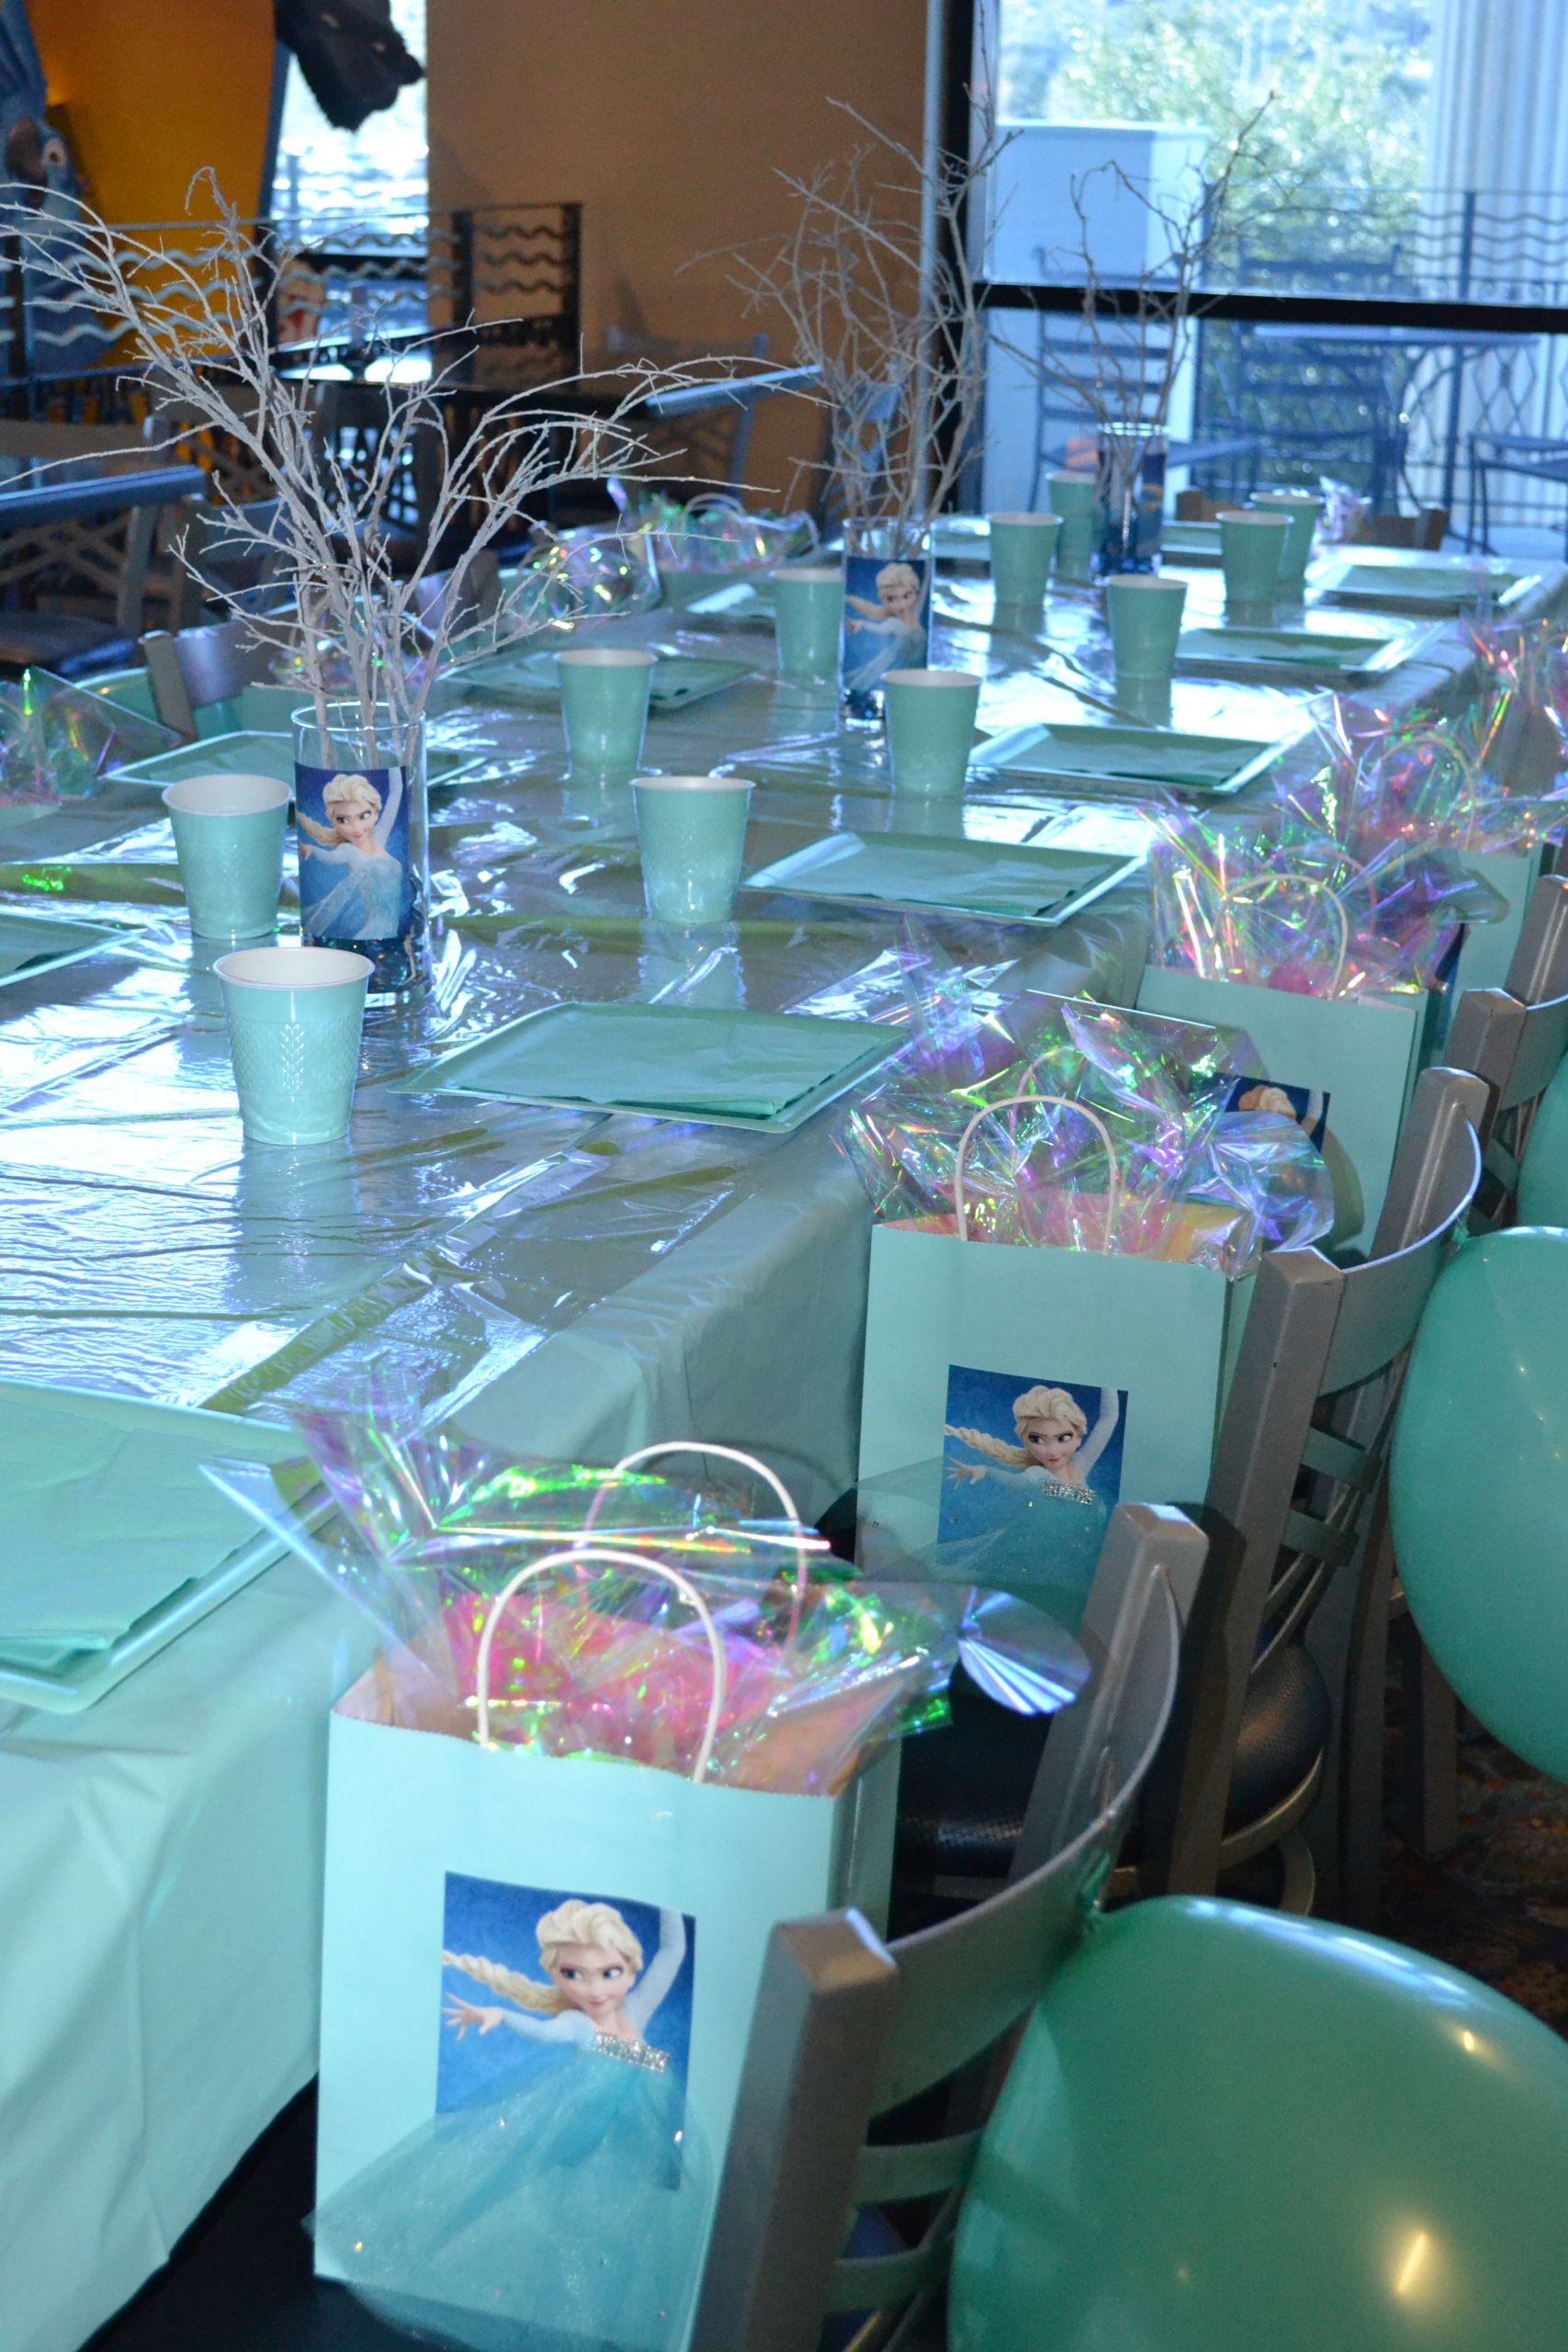 Frozen Birthday Party Ideas Homemade
 Frozen Homemade Party decorations Wooden Branches for